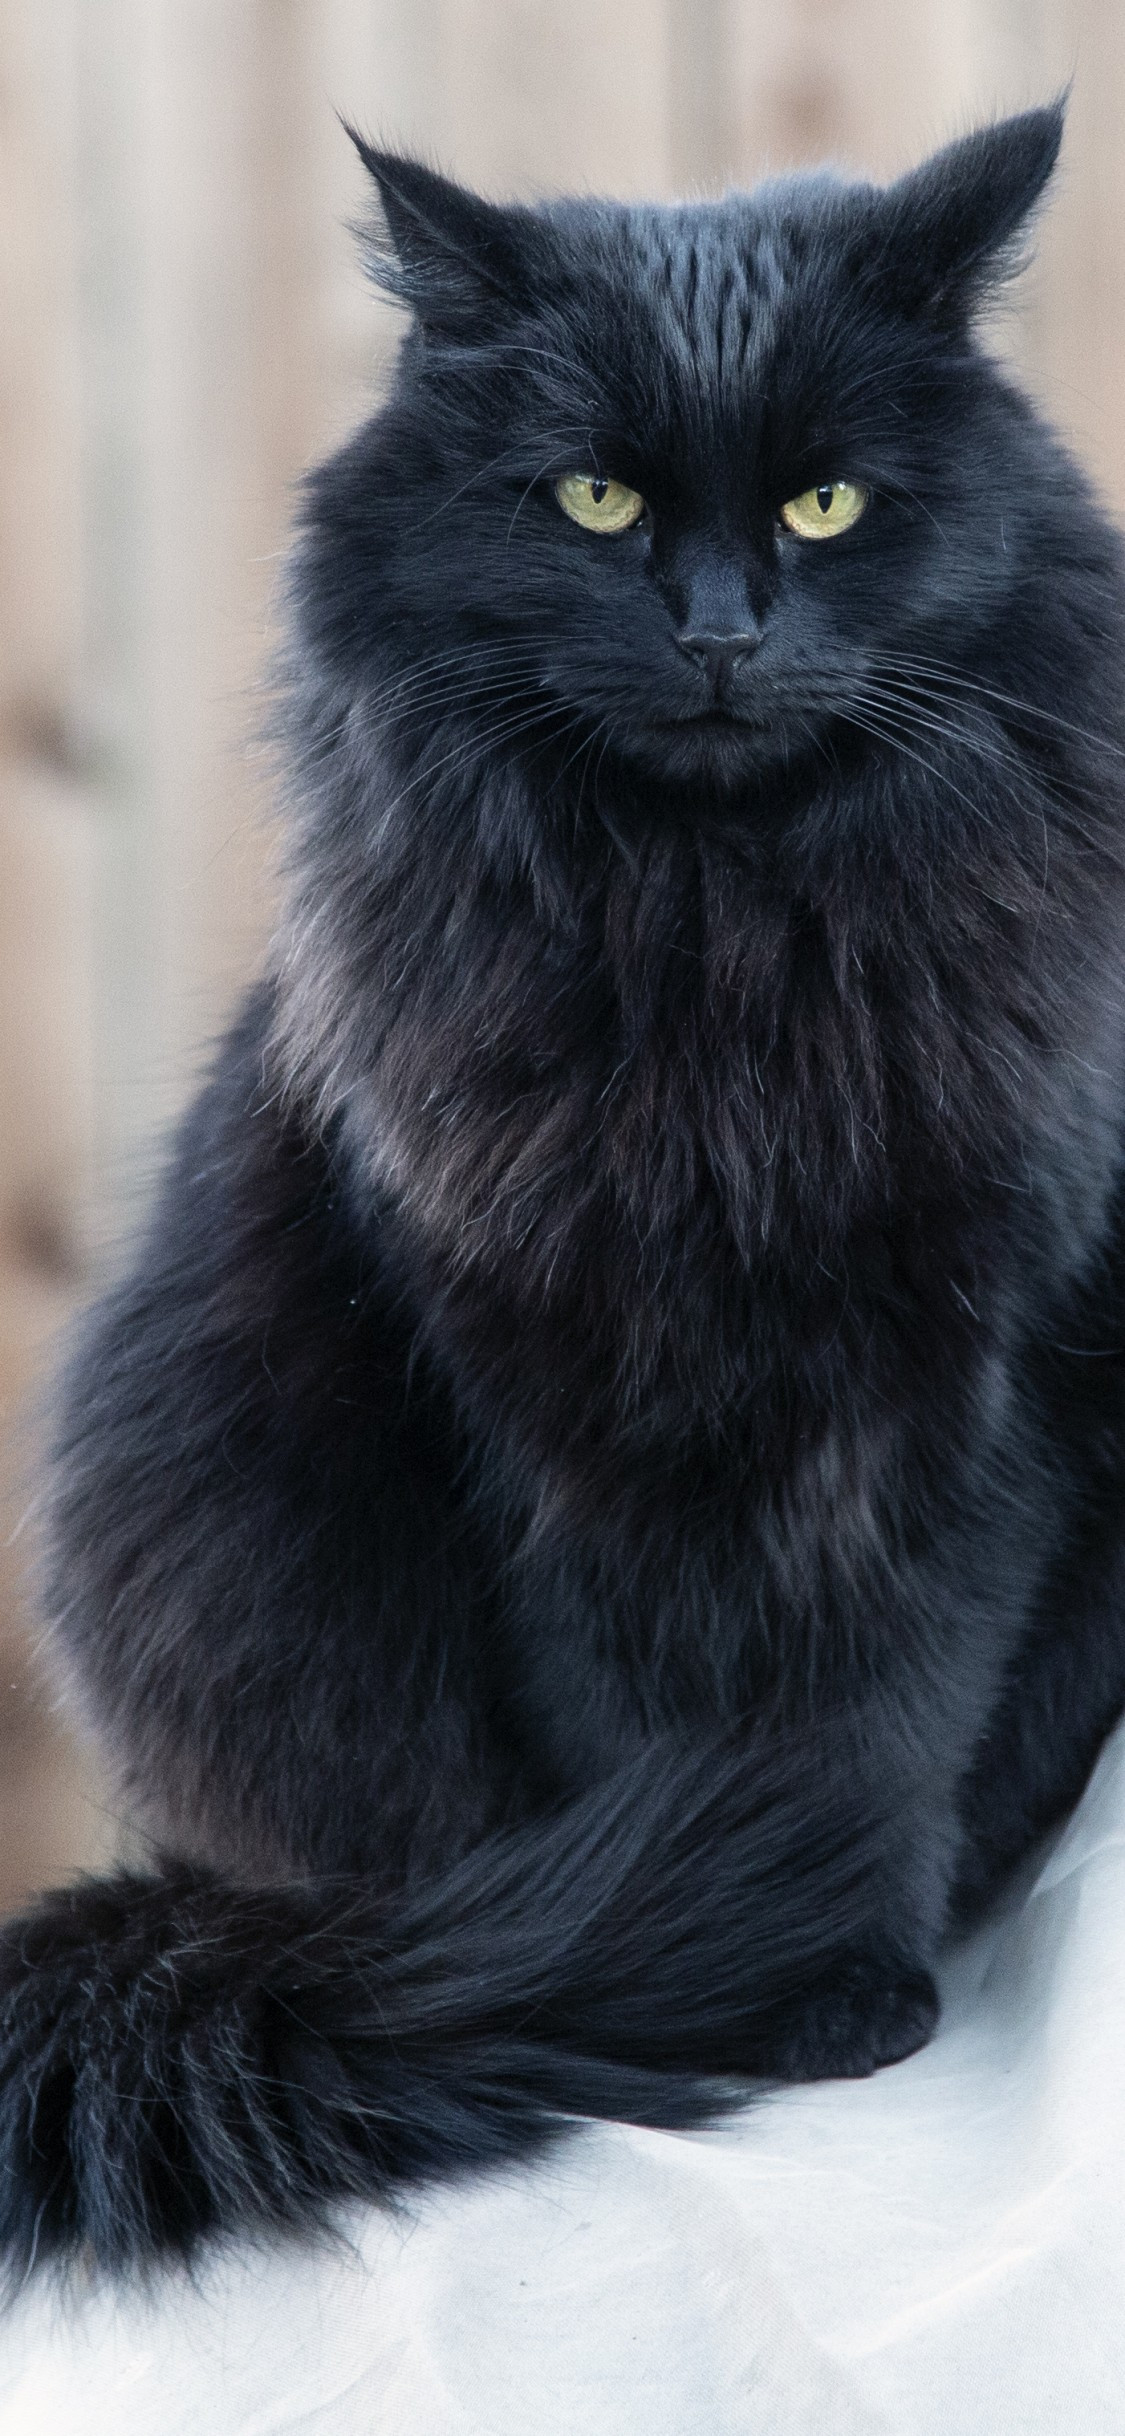 Black Fluffy Cat Stare Angry Expression